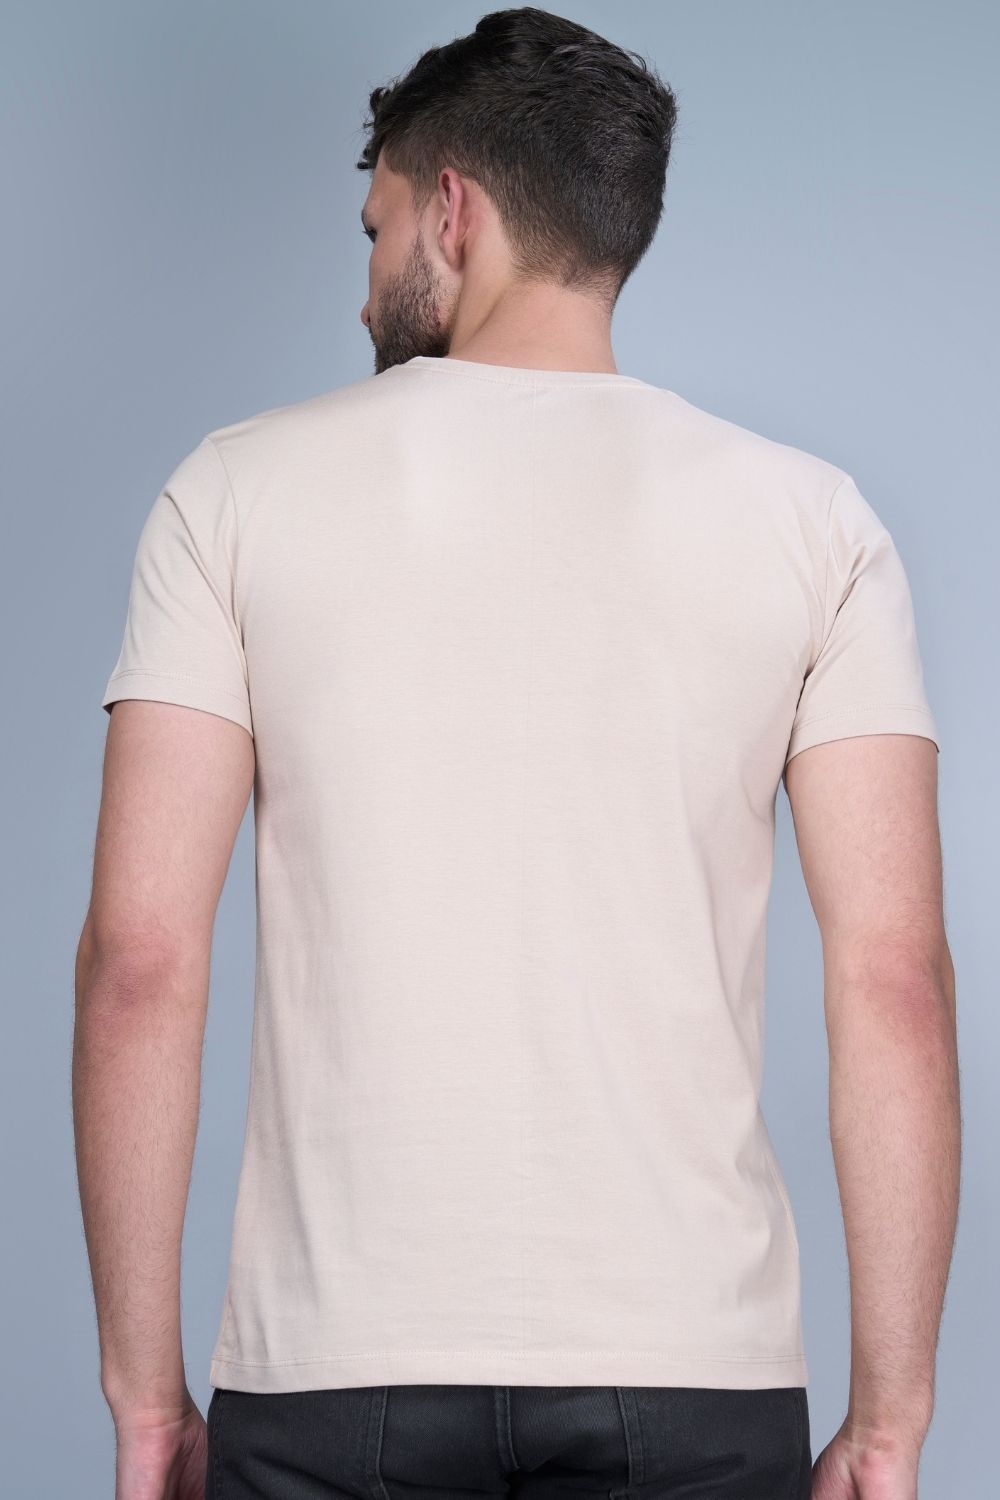 Solid T shirt for men in the color moon light with half sleeves and round neck, back view.